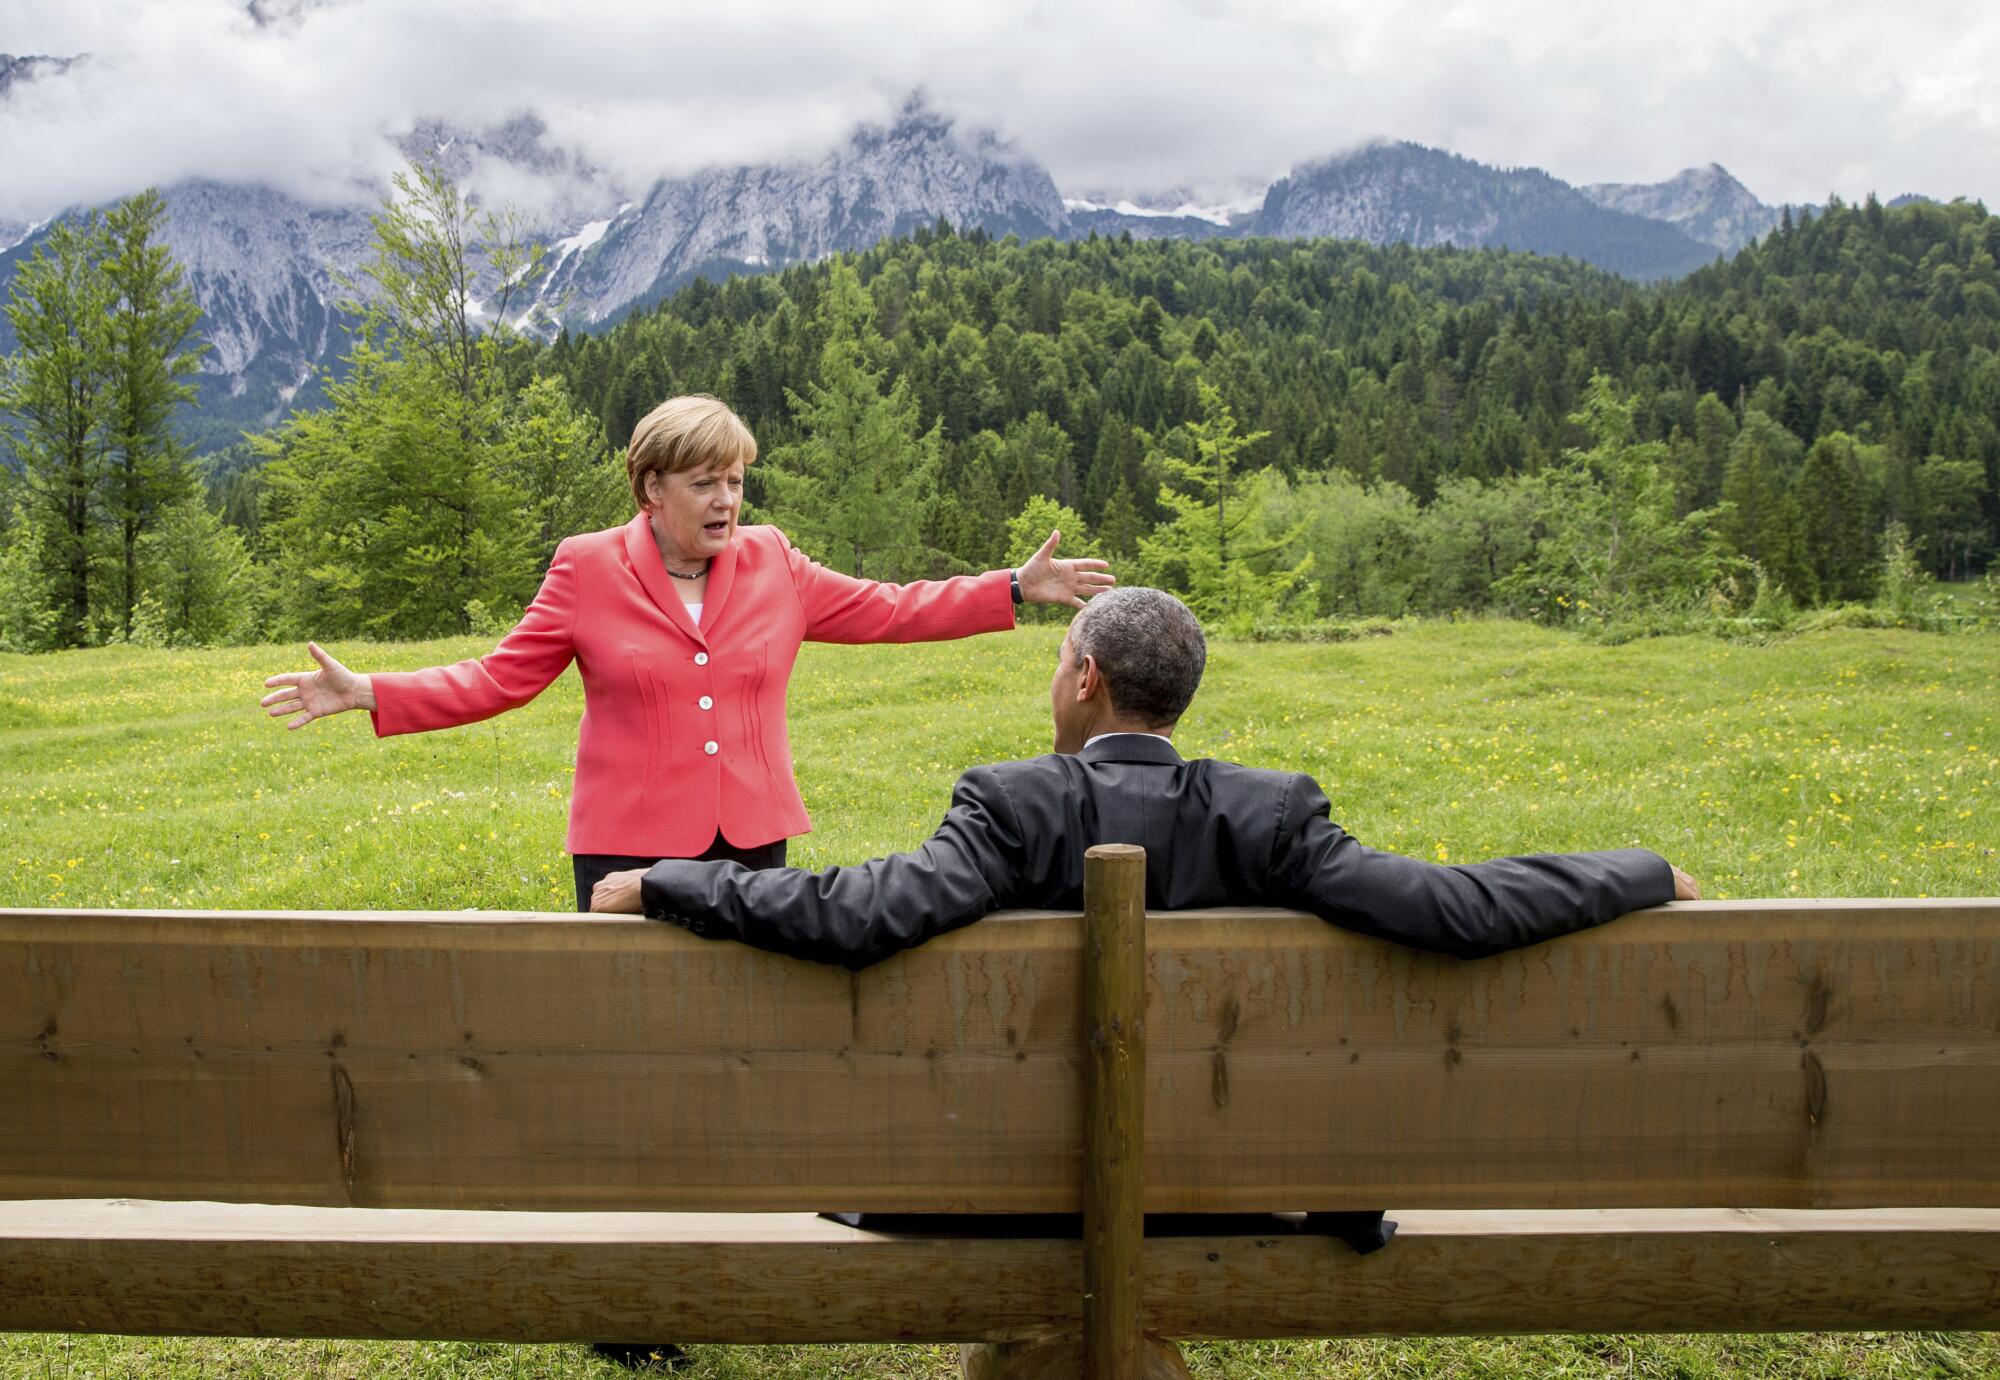 Angela Merkel talks to then-President Obama in 2015 in Germany, with a view of trees and mountains 